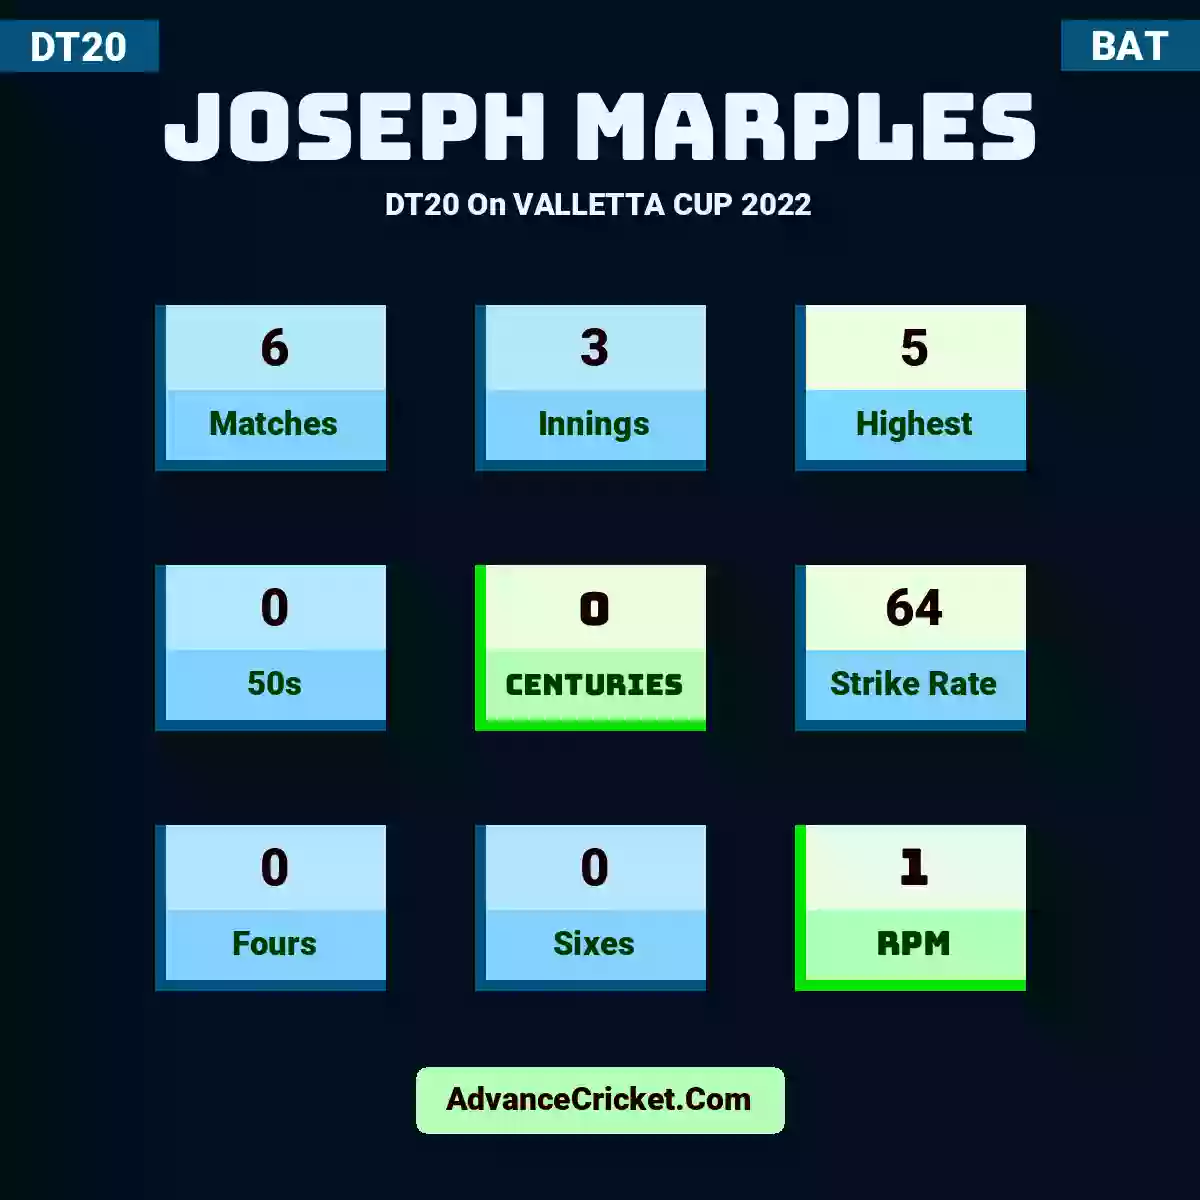 Joseph Marples DT20  On VALLETTA CUP 2022, Joseph Marples played 6 matches, scored 5 runs as highest, 0 half-centuries, and 0 centuries, with a strike rate of 64. J.Marples hit 0 fours and 0 sixes, with an RPM of 1.